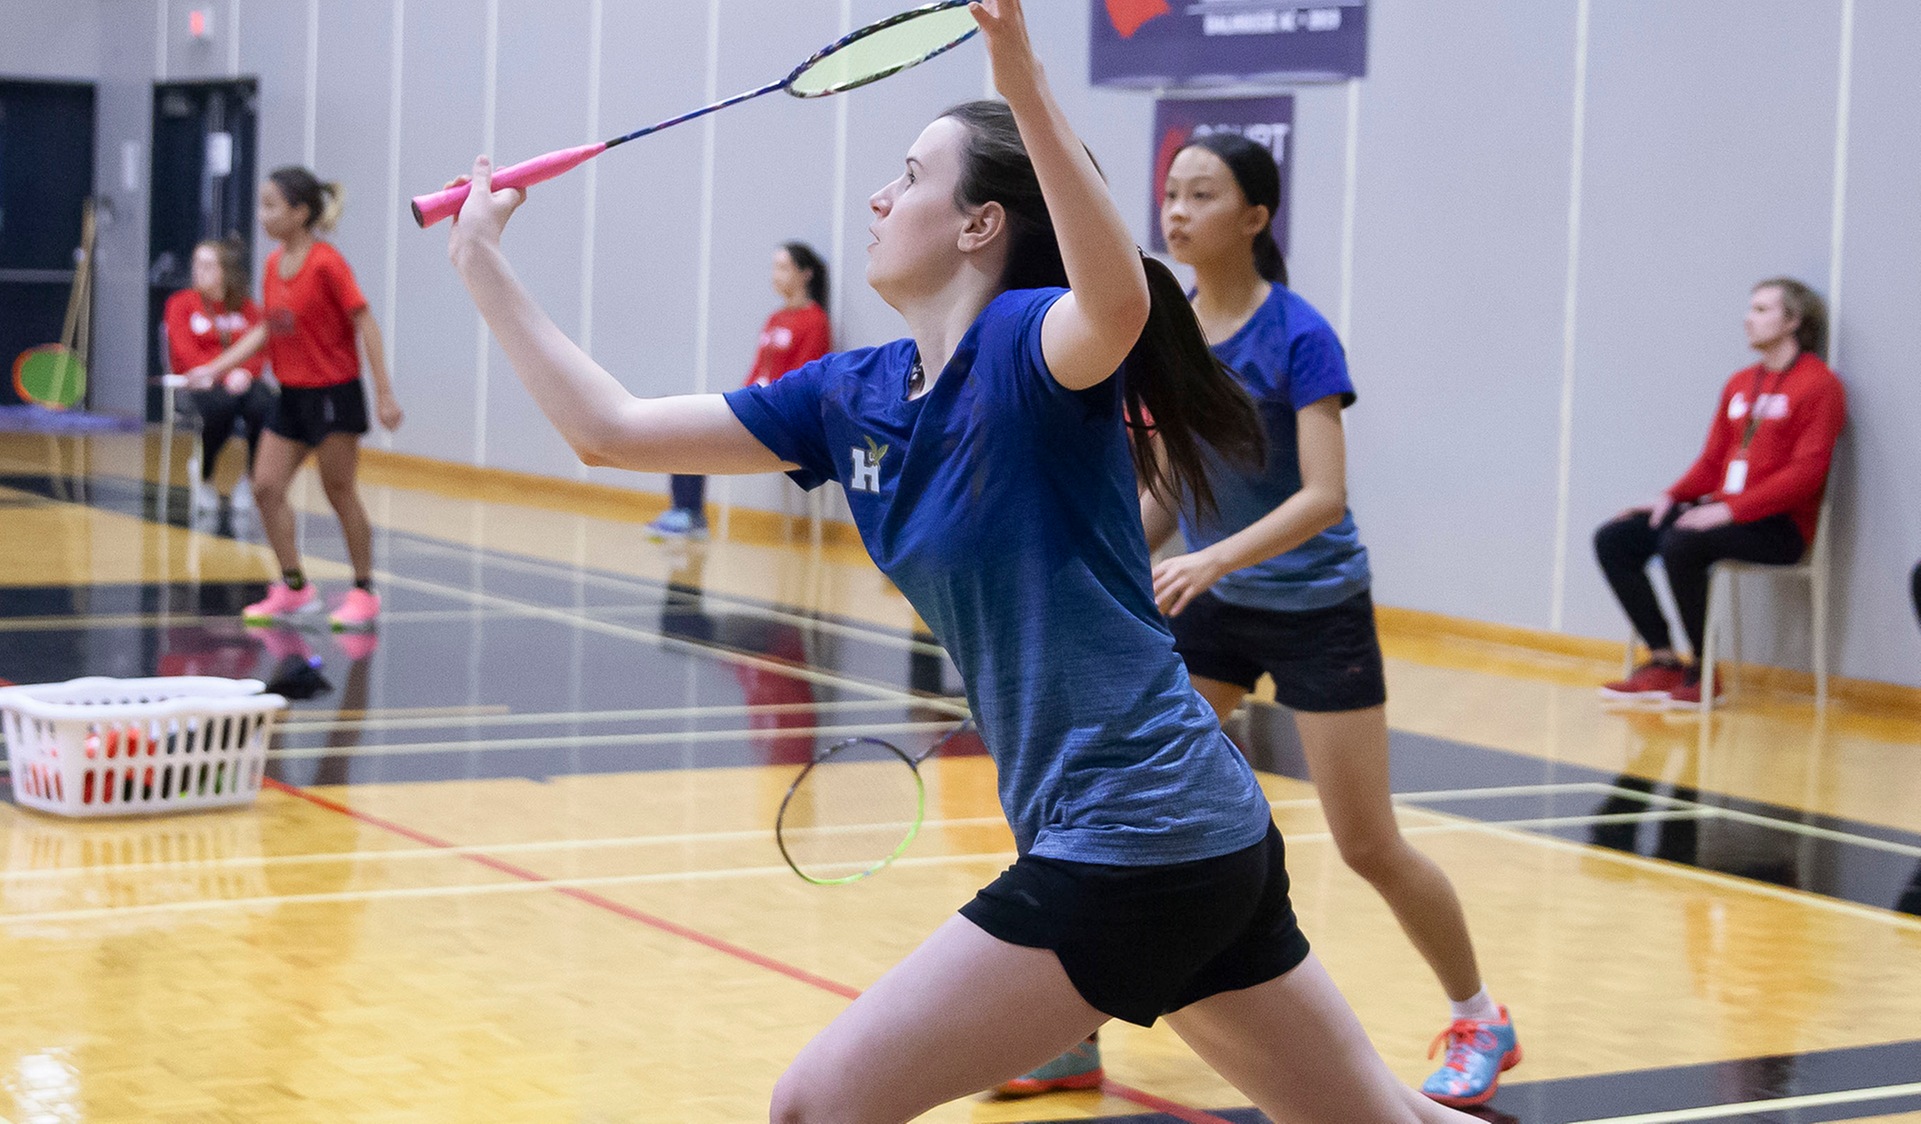 HAWKS ROWE AND DUONG PERFECT ON WAY TO 2019 CCAA WOMEN’S DOUBLES GOLD